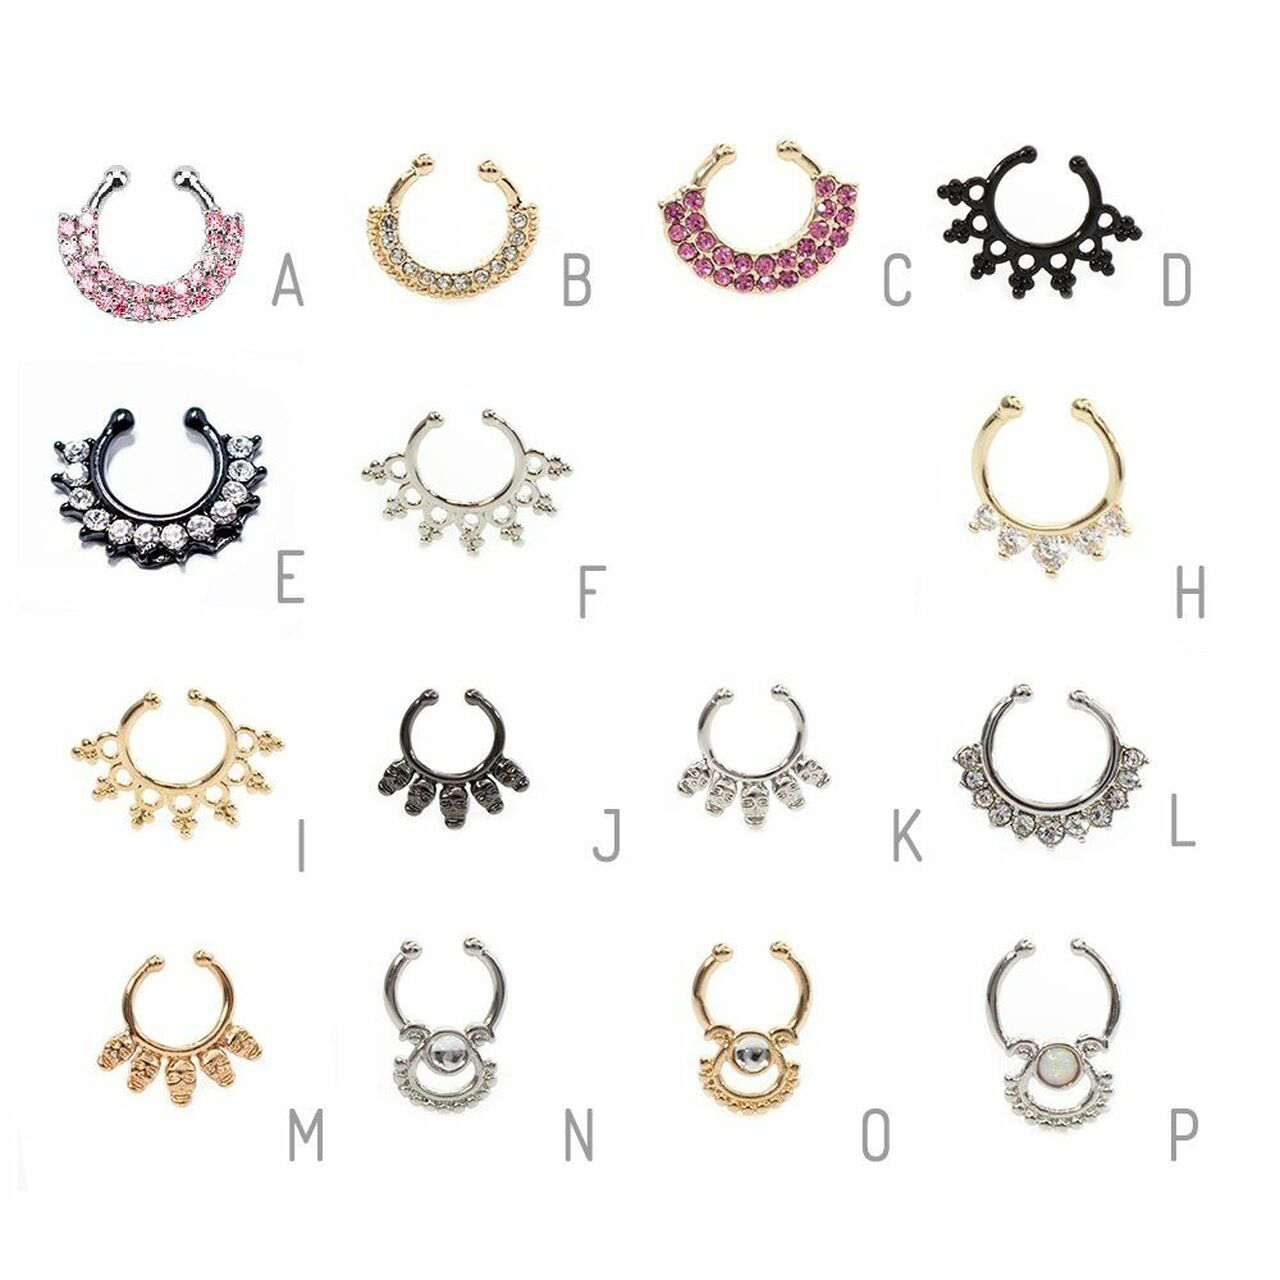 QWALIT Fake Septum Jewelry Faux Septum Rings Hoop Face Septum Hoops Surgical Stainless Steel Non Piercing Septum Nose Rings for Men Women Silver Black Rose Gold Rainbow 8mm 10mm 